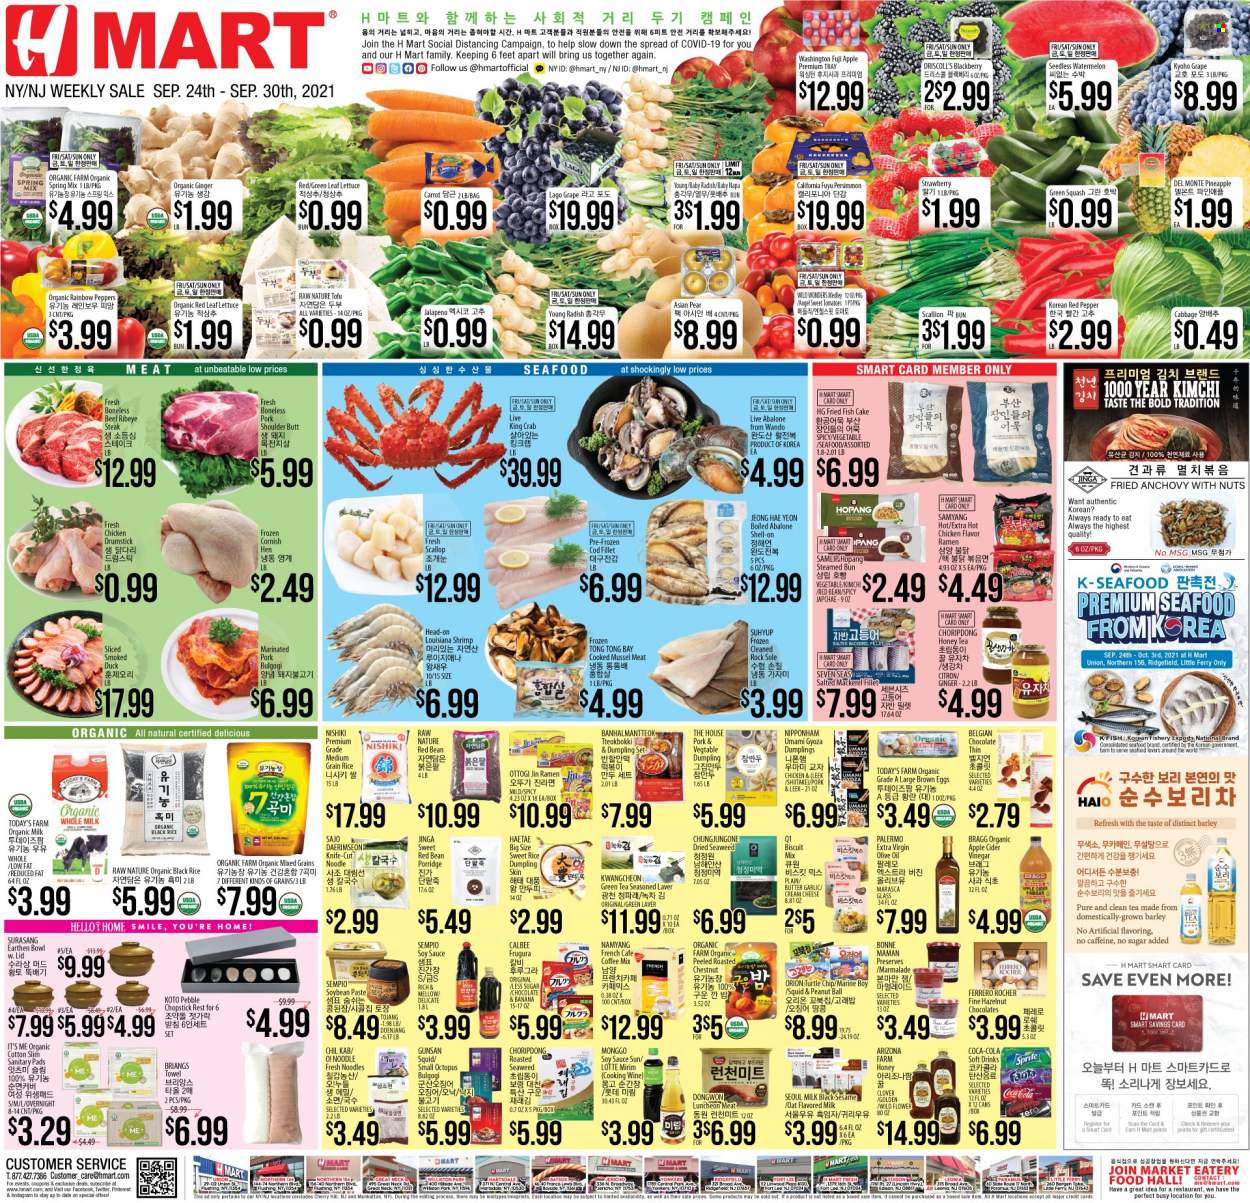 thumbnail - Hmart Flyer - 09/24/2021 - 09/30/2021 - Sales products - persimmons, cake, cabbage, ginger, leek, radishes, tomatoes, zucchini, lettuce, peppers, jalapeño, watermelon, pineapple, pears, Fuji apple, cod, mackerel, mussels, scallops, squid, king crab, octopus, seafood, crab, fish, shrimps, abalone, fried fish, ramen, steamed bun, smoked duck, sauce, dumplings, noodles, lunch meat, cheese, tofu, Clover, organic milk, flavoured milk, eggs, butter, fish cake, chocolate, Ferrero Rocher, biscuit, oats, seaweed, anchovies, porridge, rice, medium grain rice, soy sauce, apple cider vinegar, extra virgin olive oil, vinegar, olive oil, oil, honey, chestnuts, Coca-Cola, soft drink, AriZona, green tea, tea, coffee, cooking wine, cornish hen, beef meat, beef steak, steak, ribeye steak, pork meat, pork shoulder, marinated pork, sanitary pads, knife, lid, tray, bowl. Page 1.